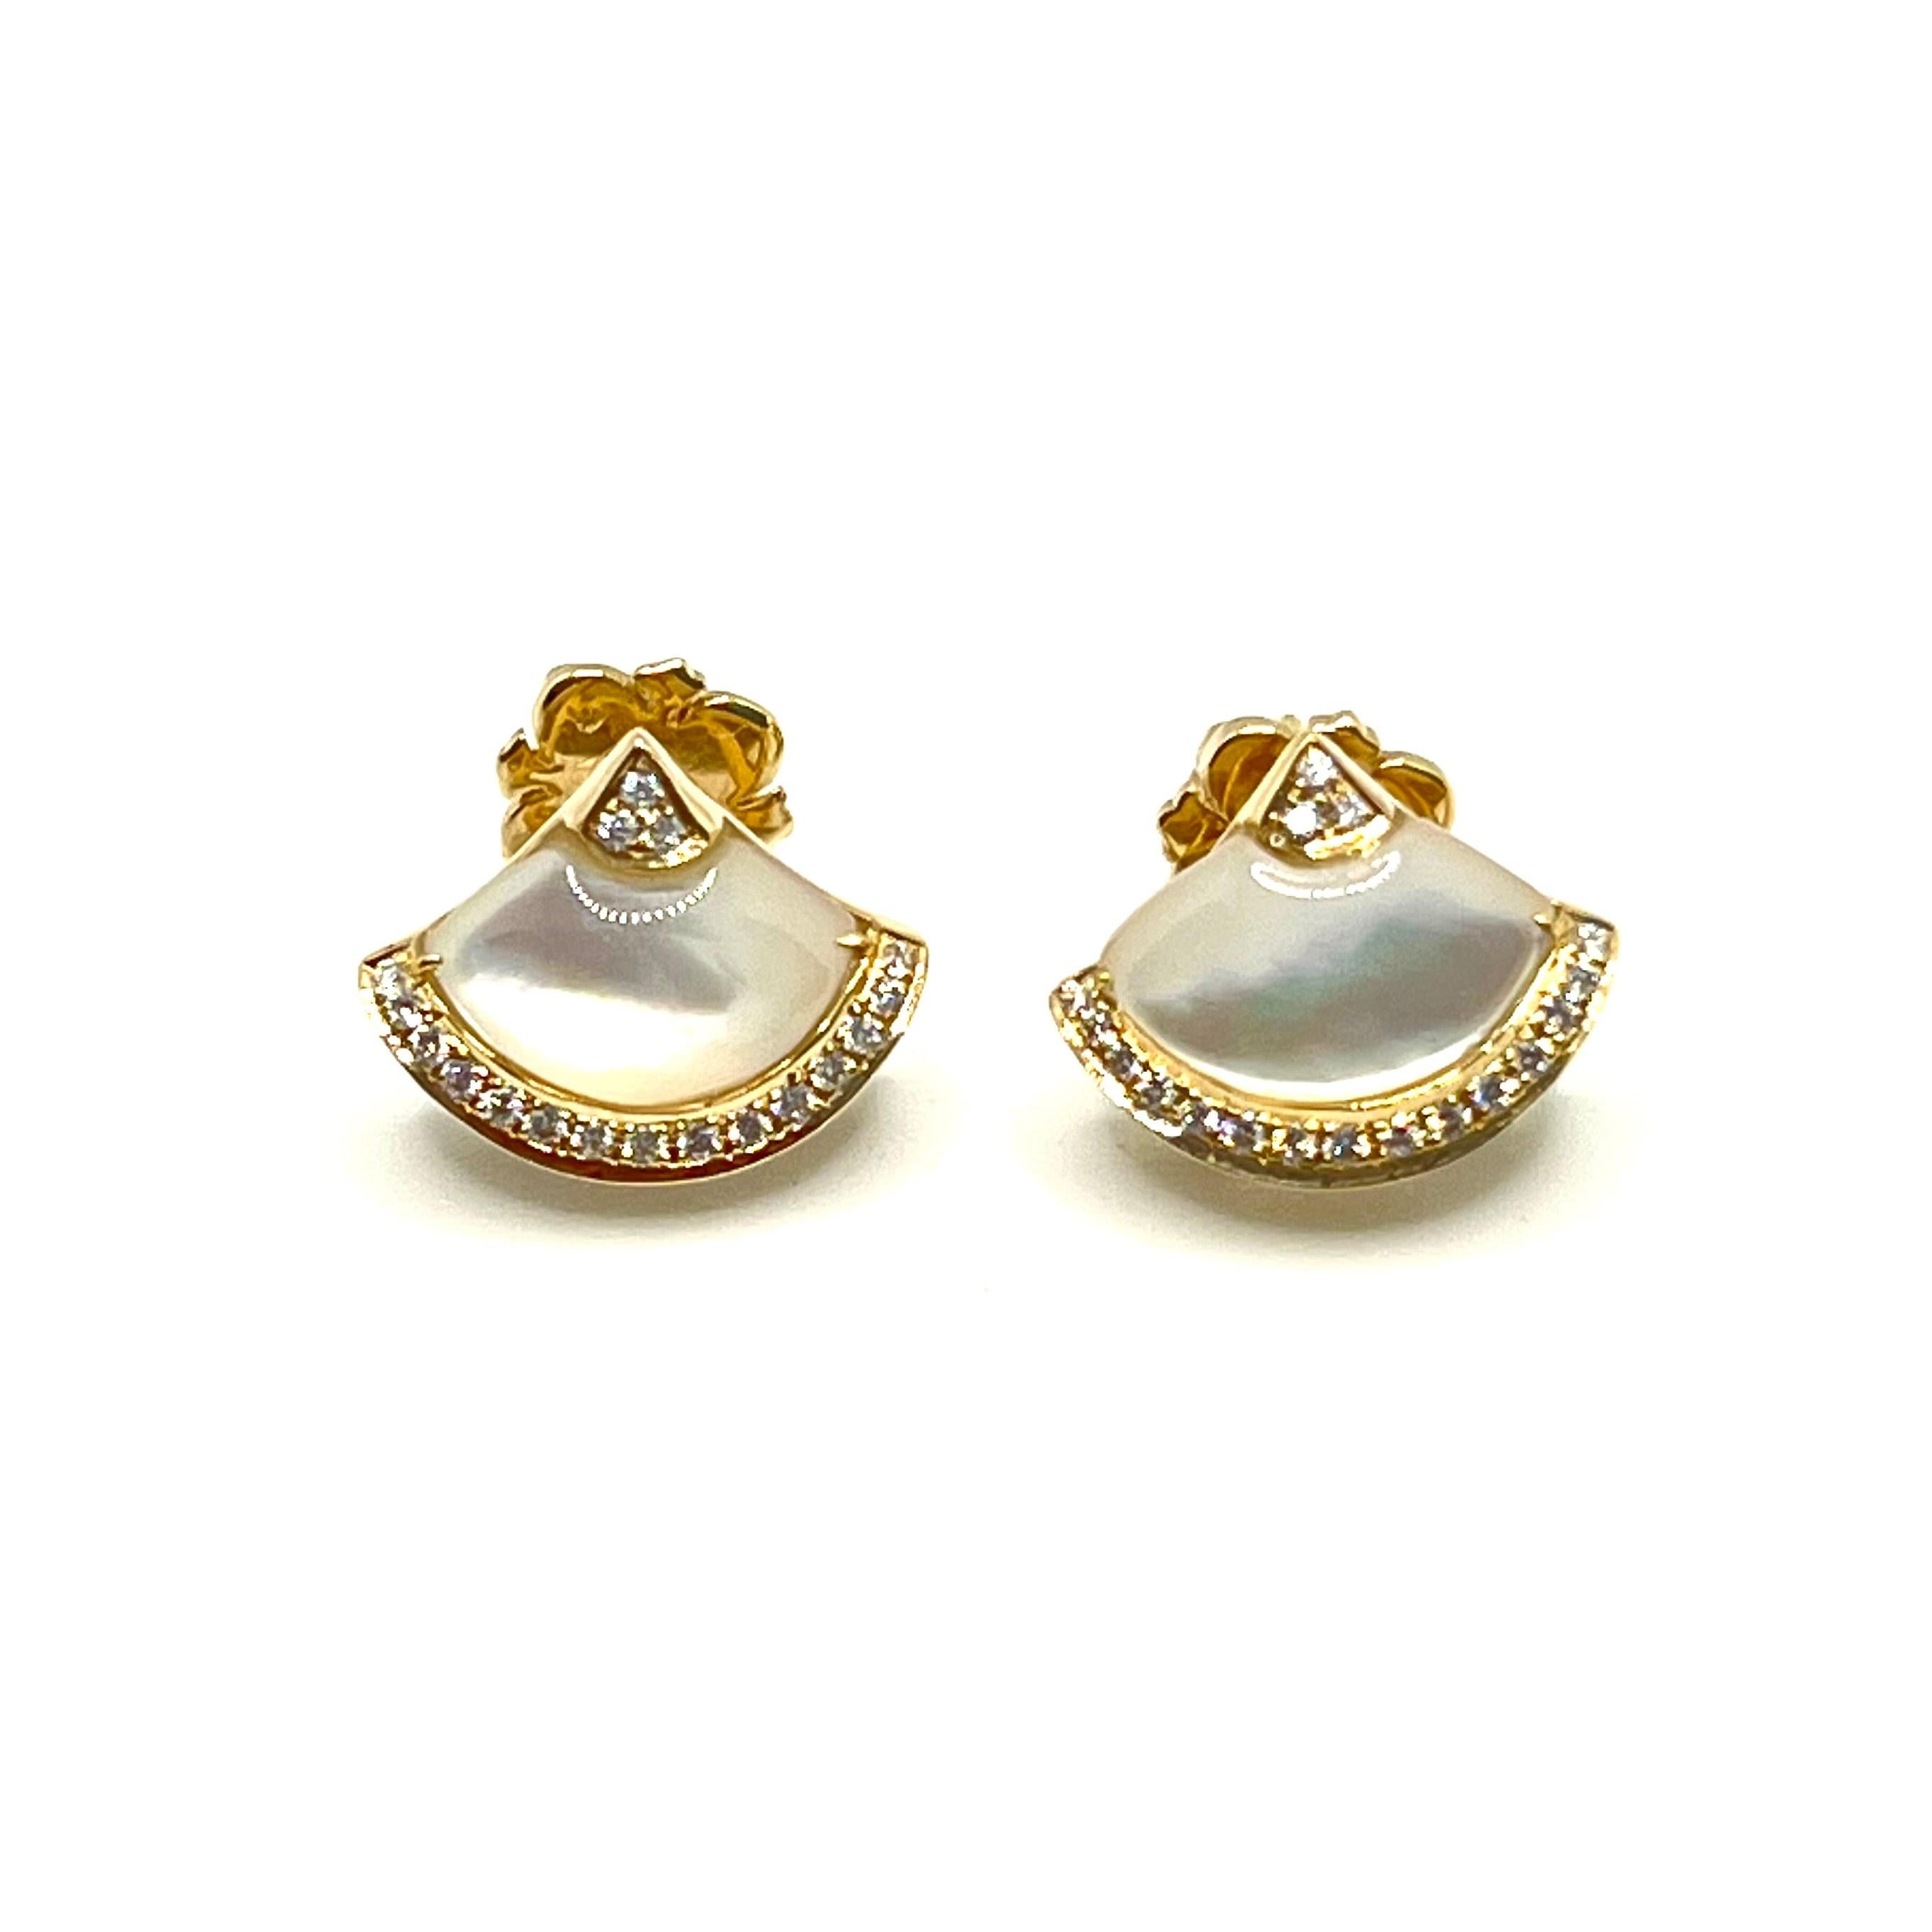 Stunning handcrafted fan-shape mother of pearl diamond stud earrings.

Handcrafted from 14k yellow gold, the earrings features beautiful 2.7 carats Mother of Pearl and .17 carats of diamonds! Straight post with large friction earrings back allow the